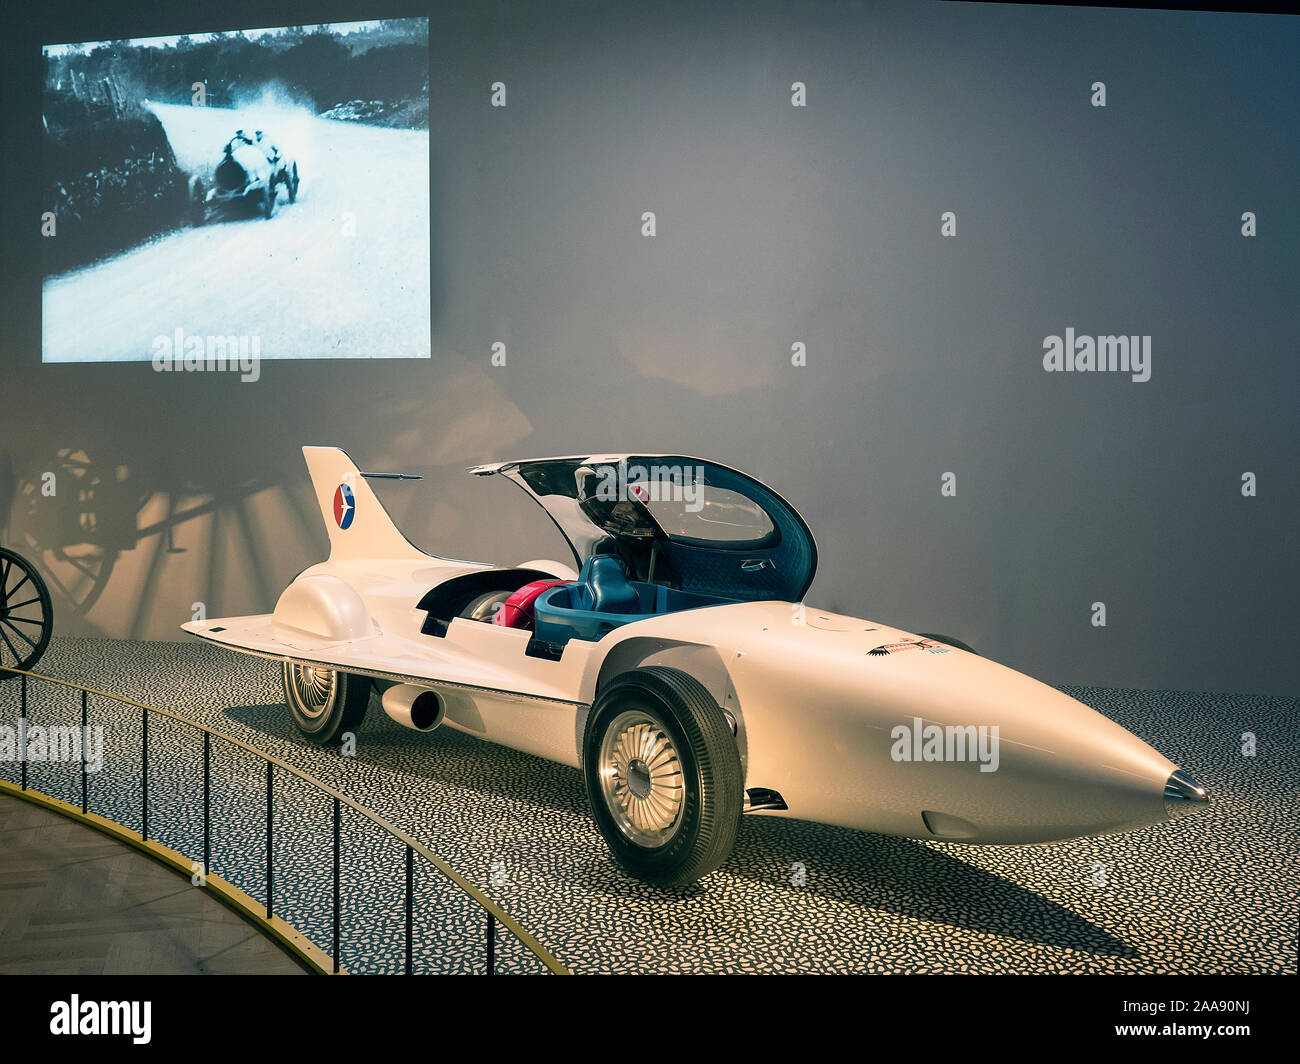 GM Firebird 1 concept car 1953. At the V&A Exhibition 'Cars Accelerating the Modern World. Stock Photo